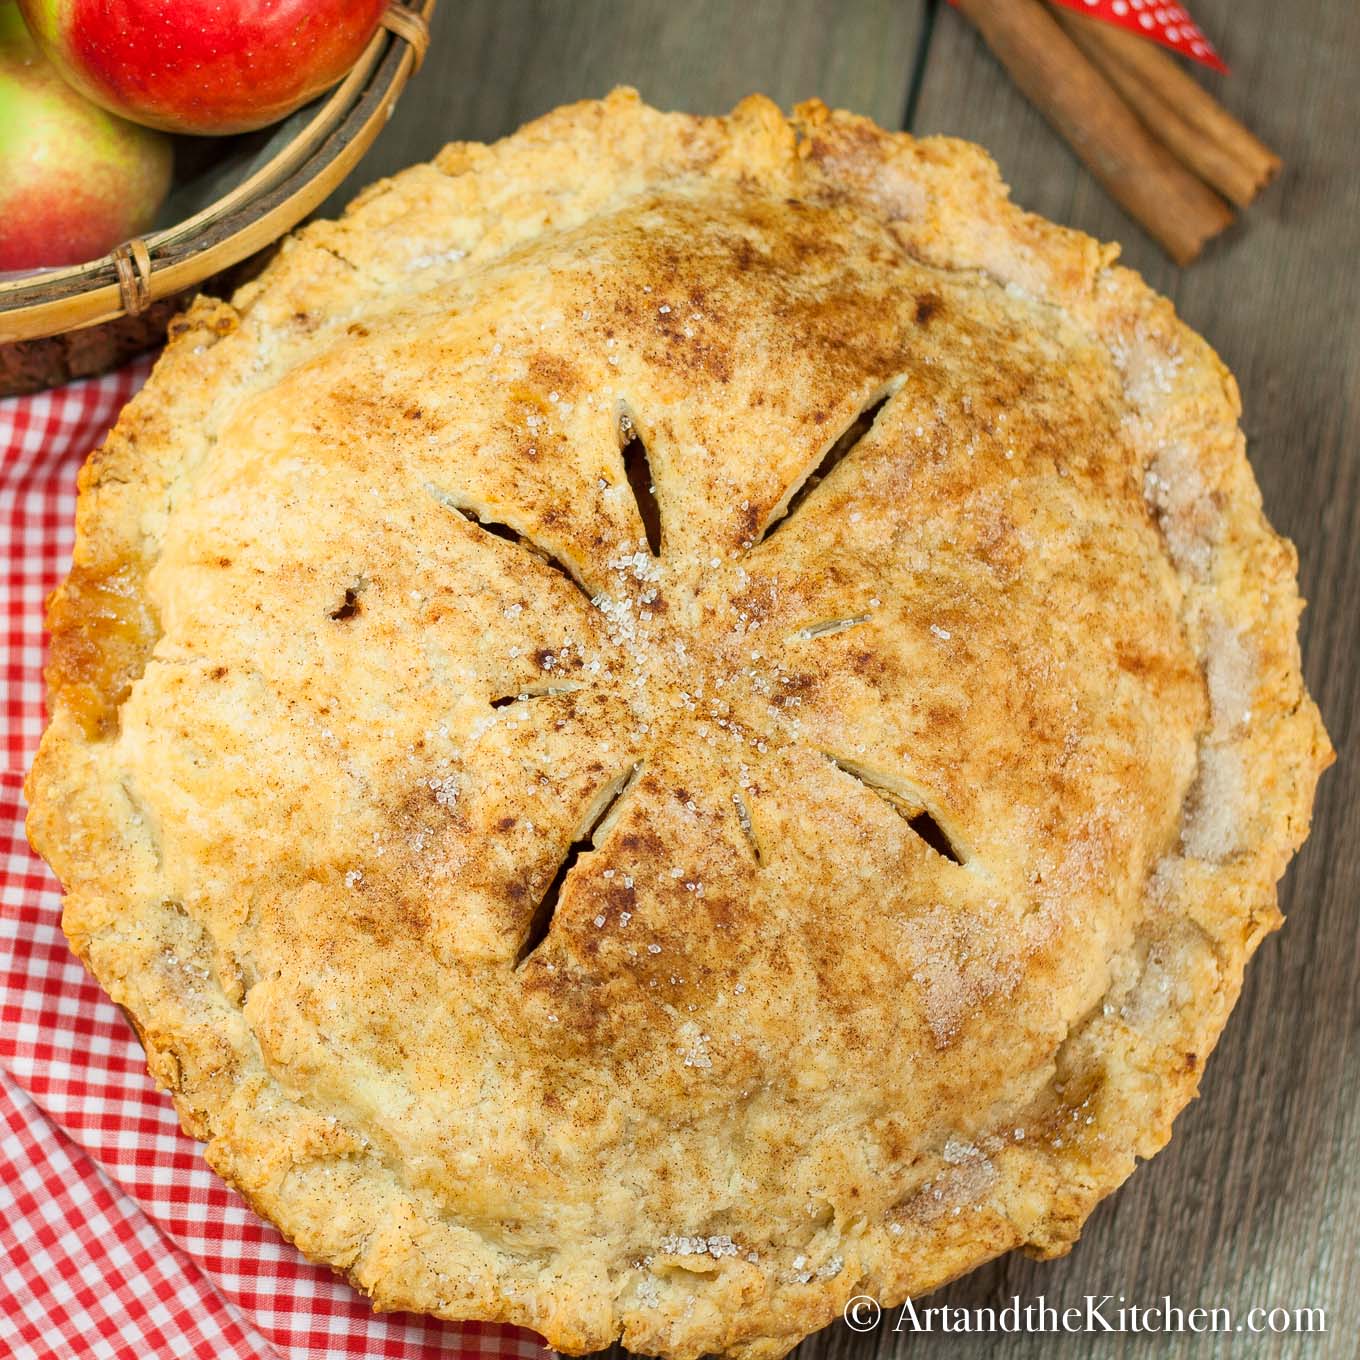 Apple pie with golden flaky crust on checkered cloth with cinnamon sticks and basket of apples in background.